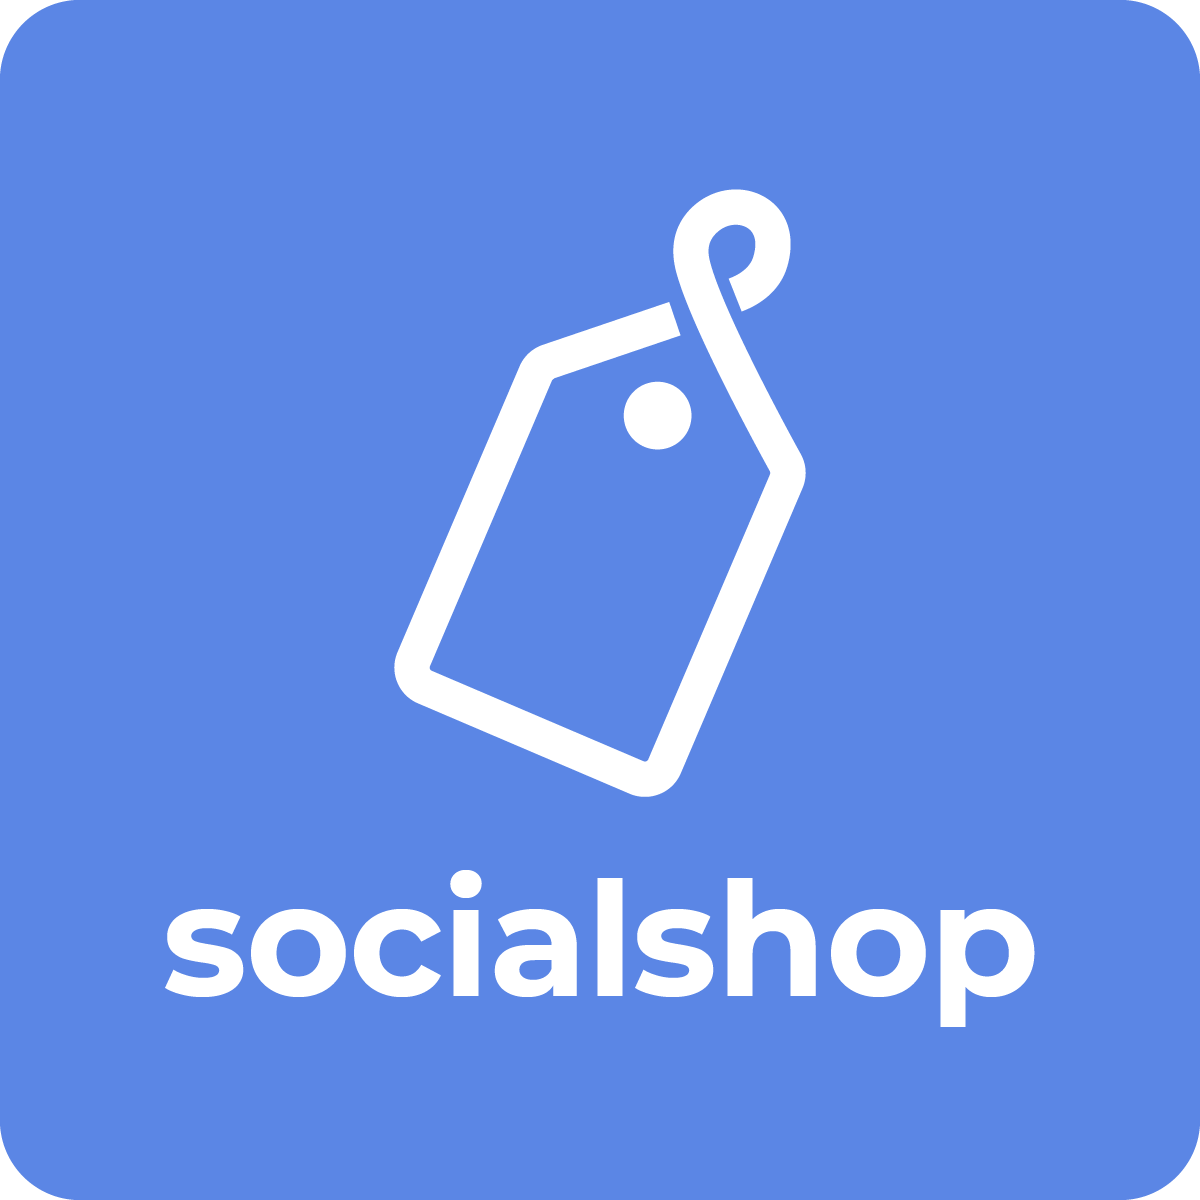 Hire Shopify Experts to integrate Facebook, Google Shopping Feed app into a Shopify store